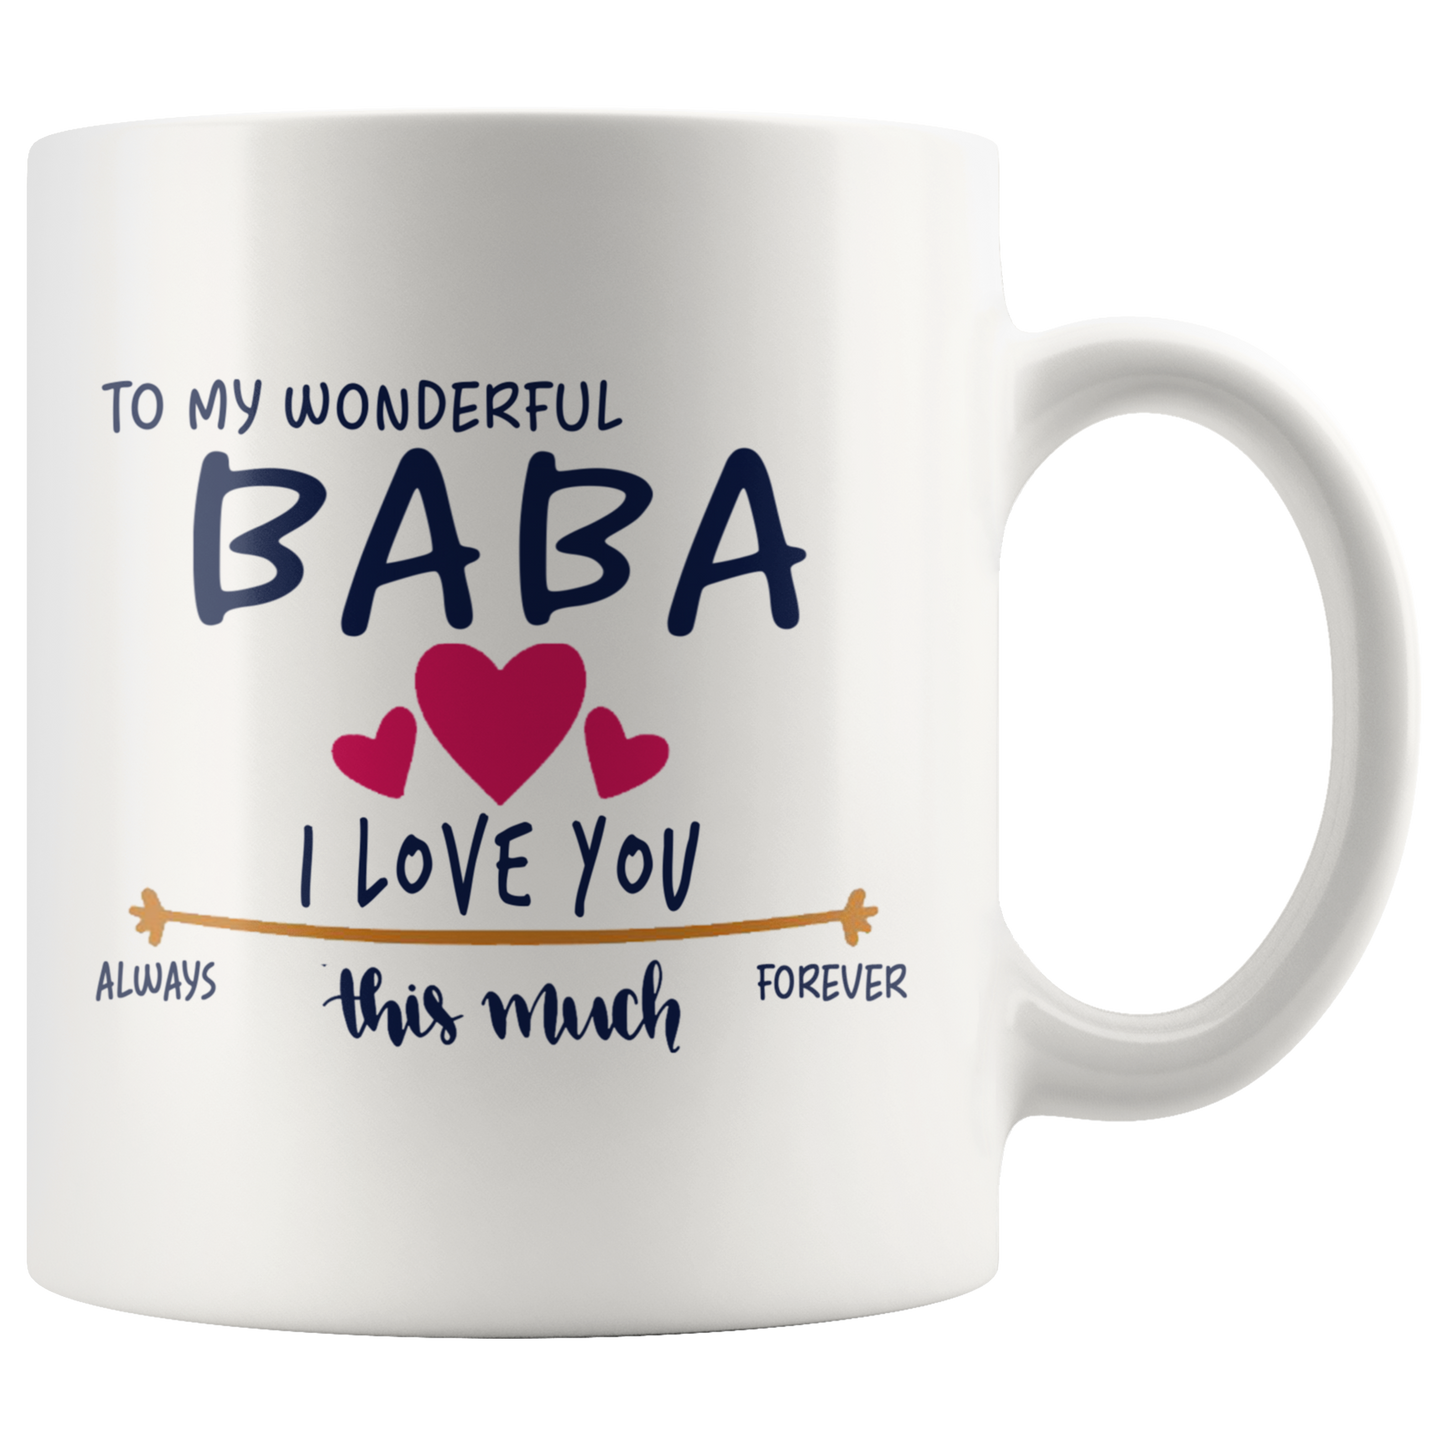 M-20470284-sp-23459 - Valentines Day Mug Gifts For Dad, Mom, Granddad, Granny - To